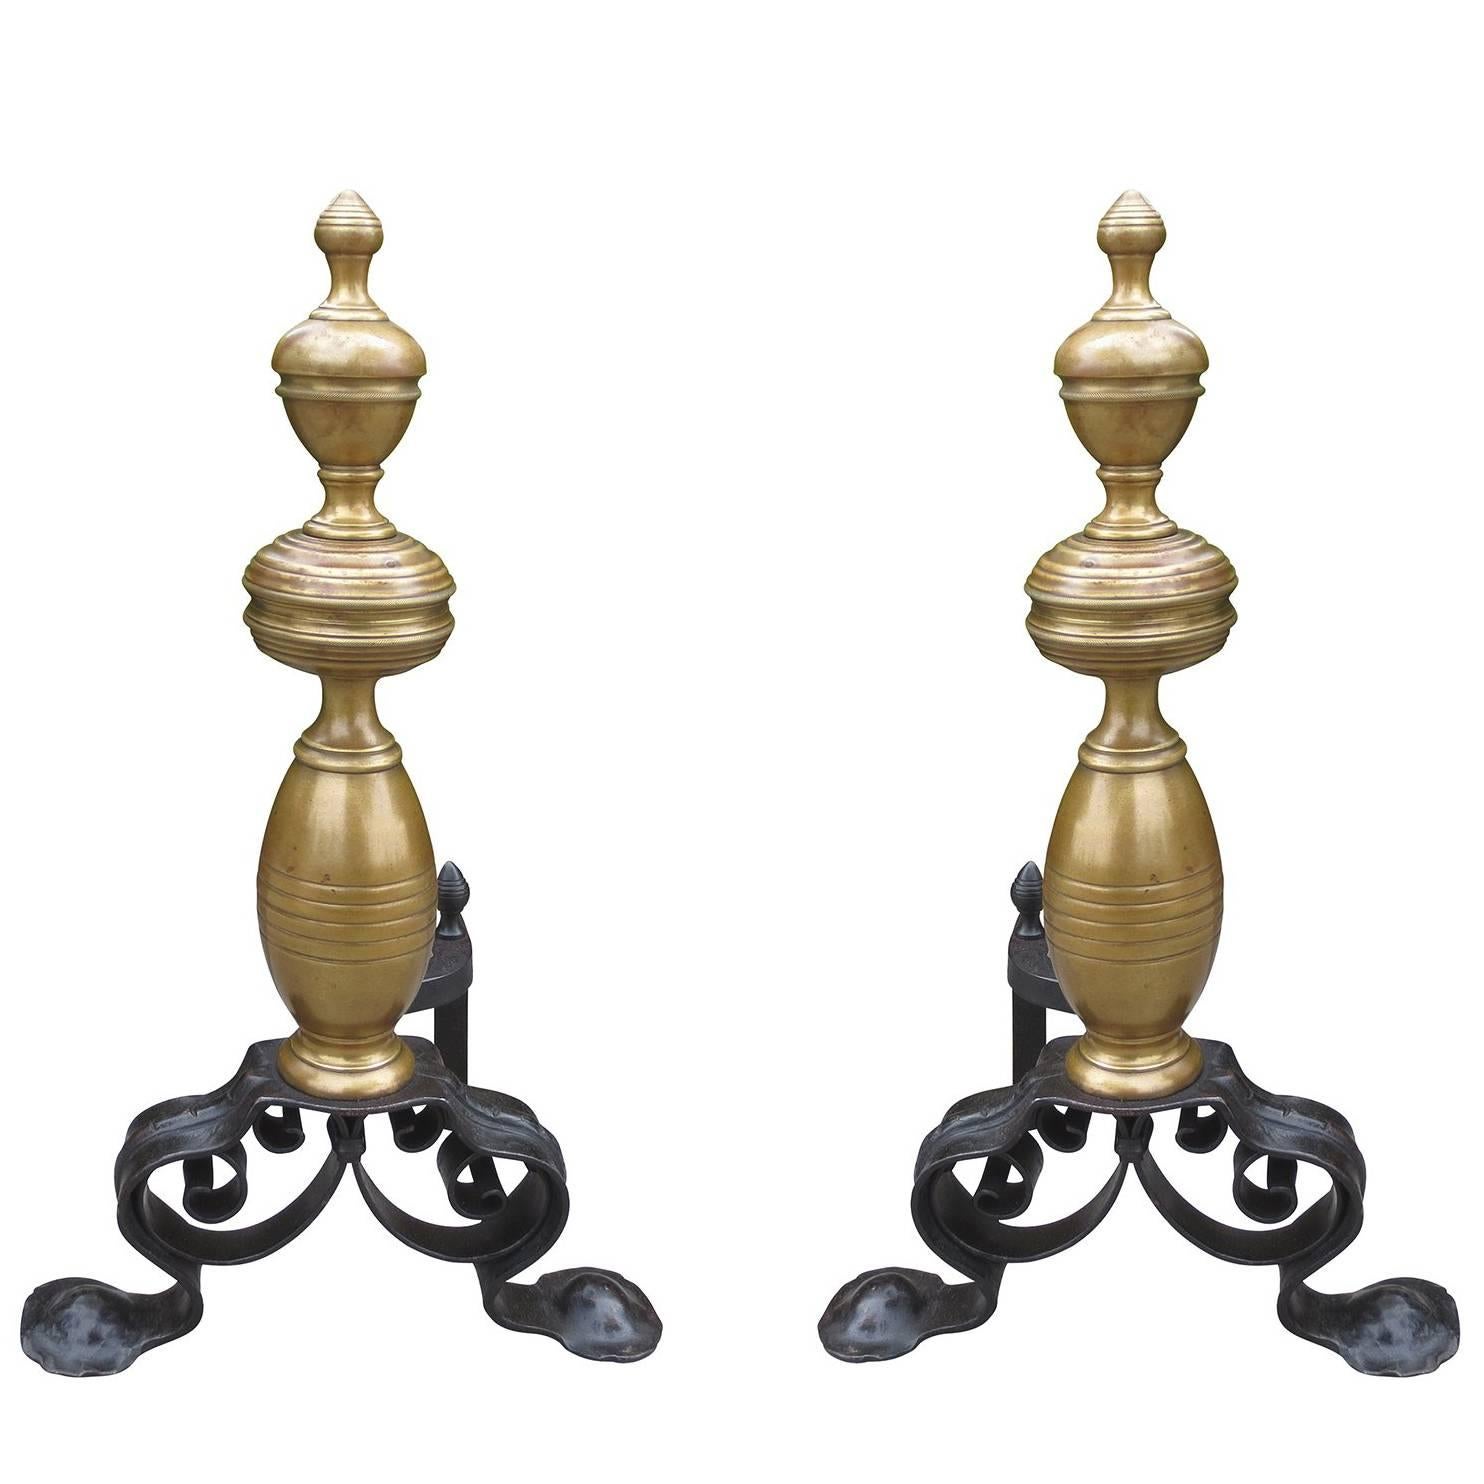 Pair of Late 19th-Early 20th Century English Bronze and Iron Andirons